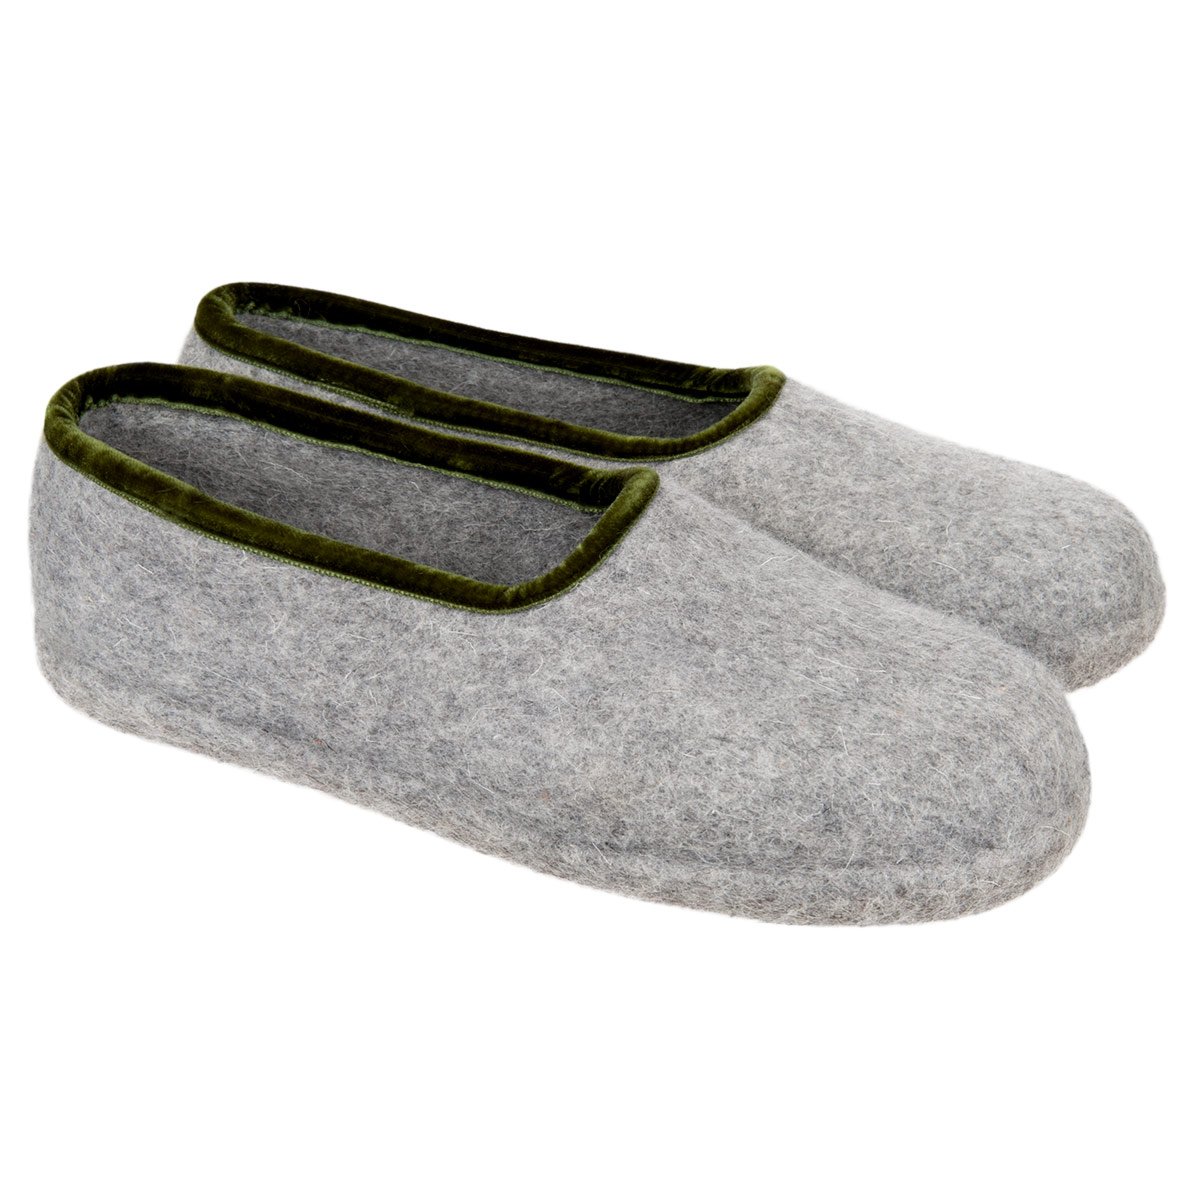 quality felt slippers in pure woolfelt 